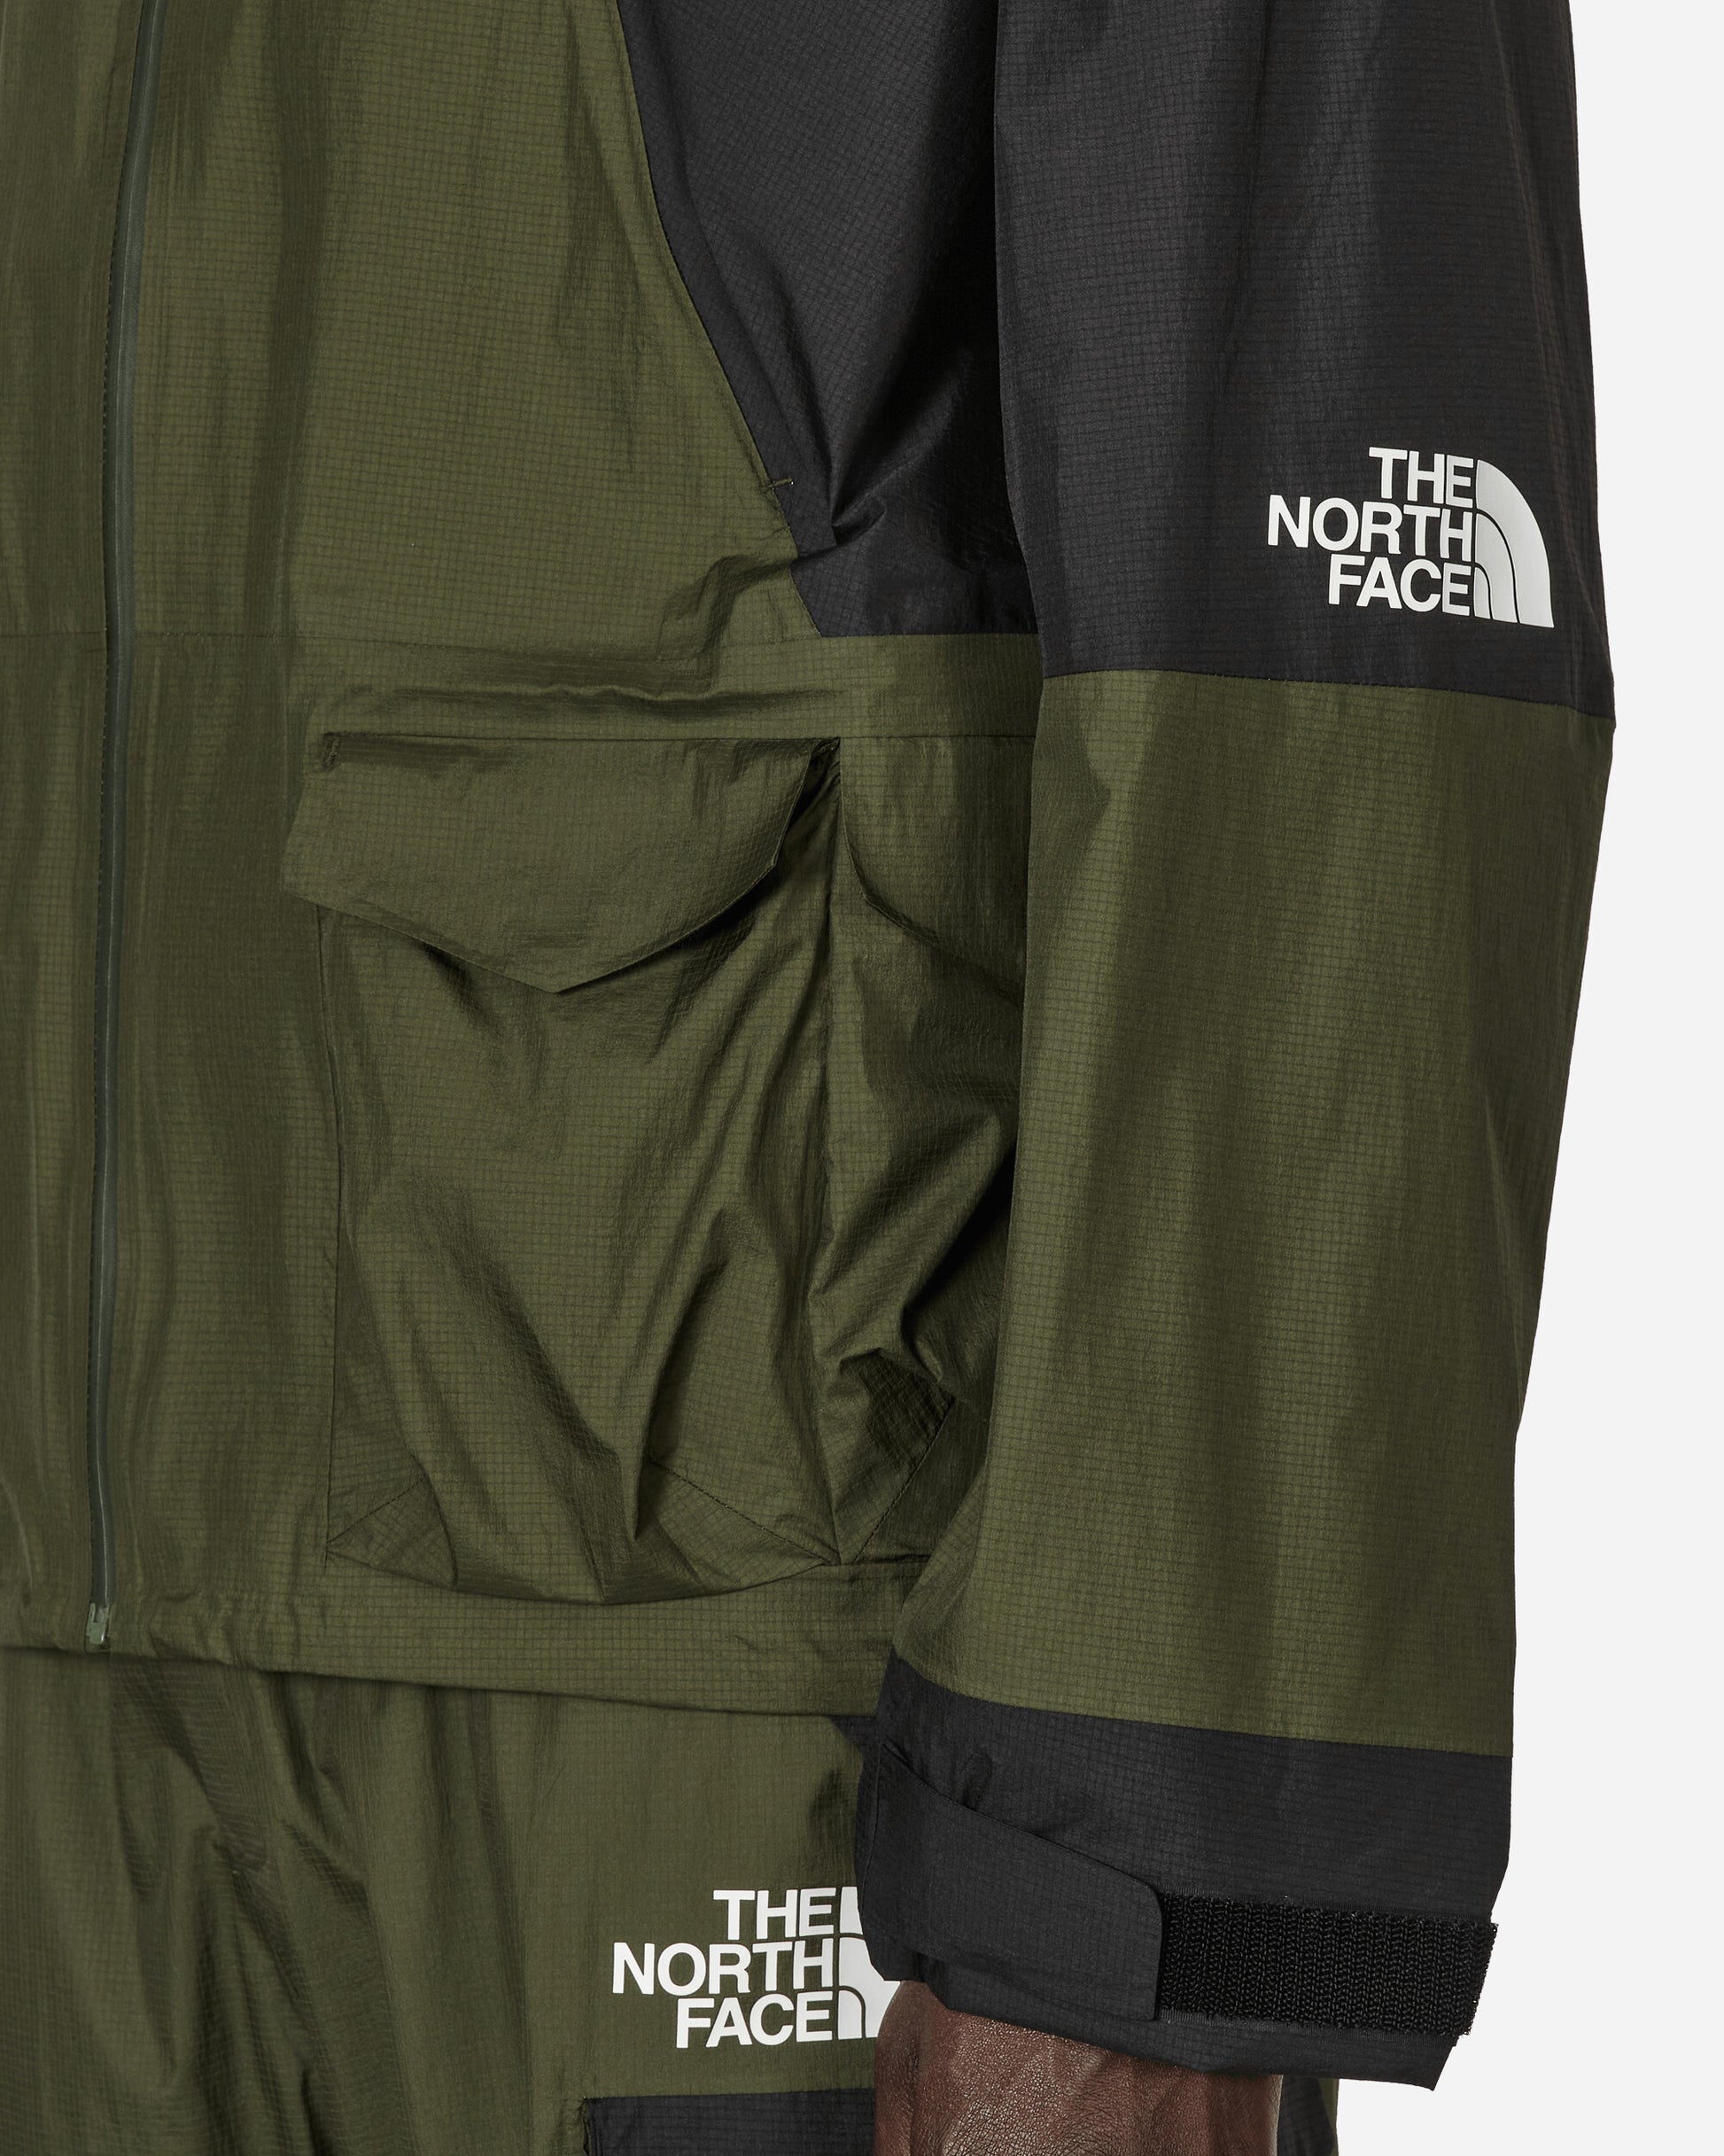 The North Face Project X Tnf X Project U Packable Shell Jacket Forest Night Green-TNF Black Coats and Jackets Jackets NF0A87UE R0U1